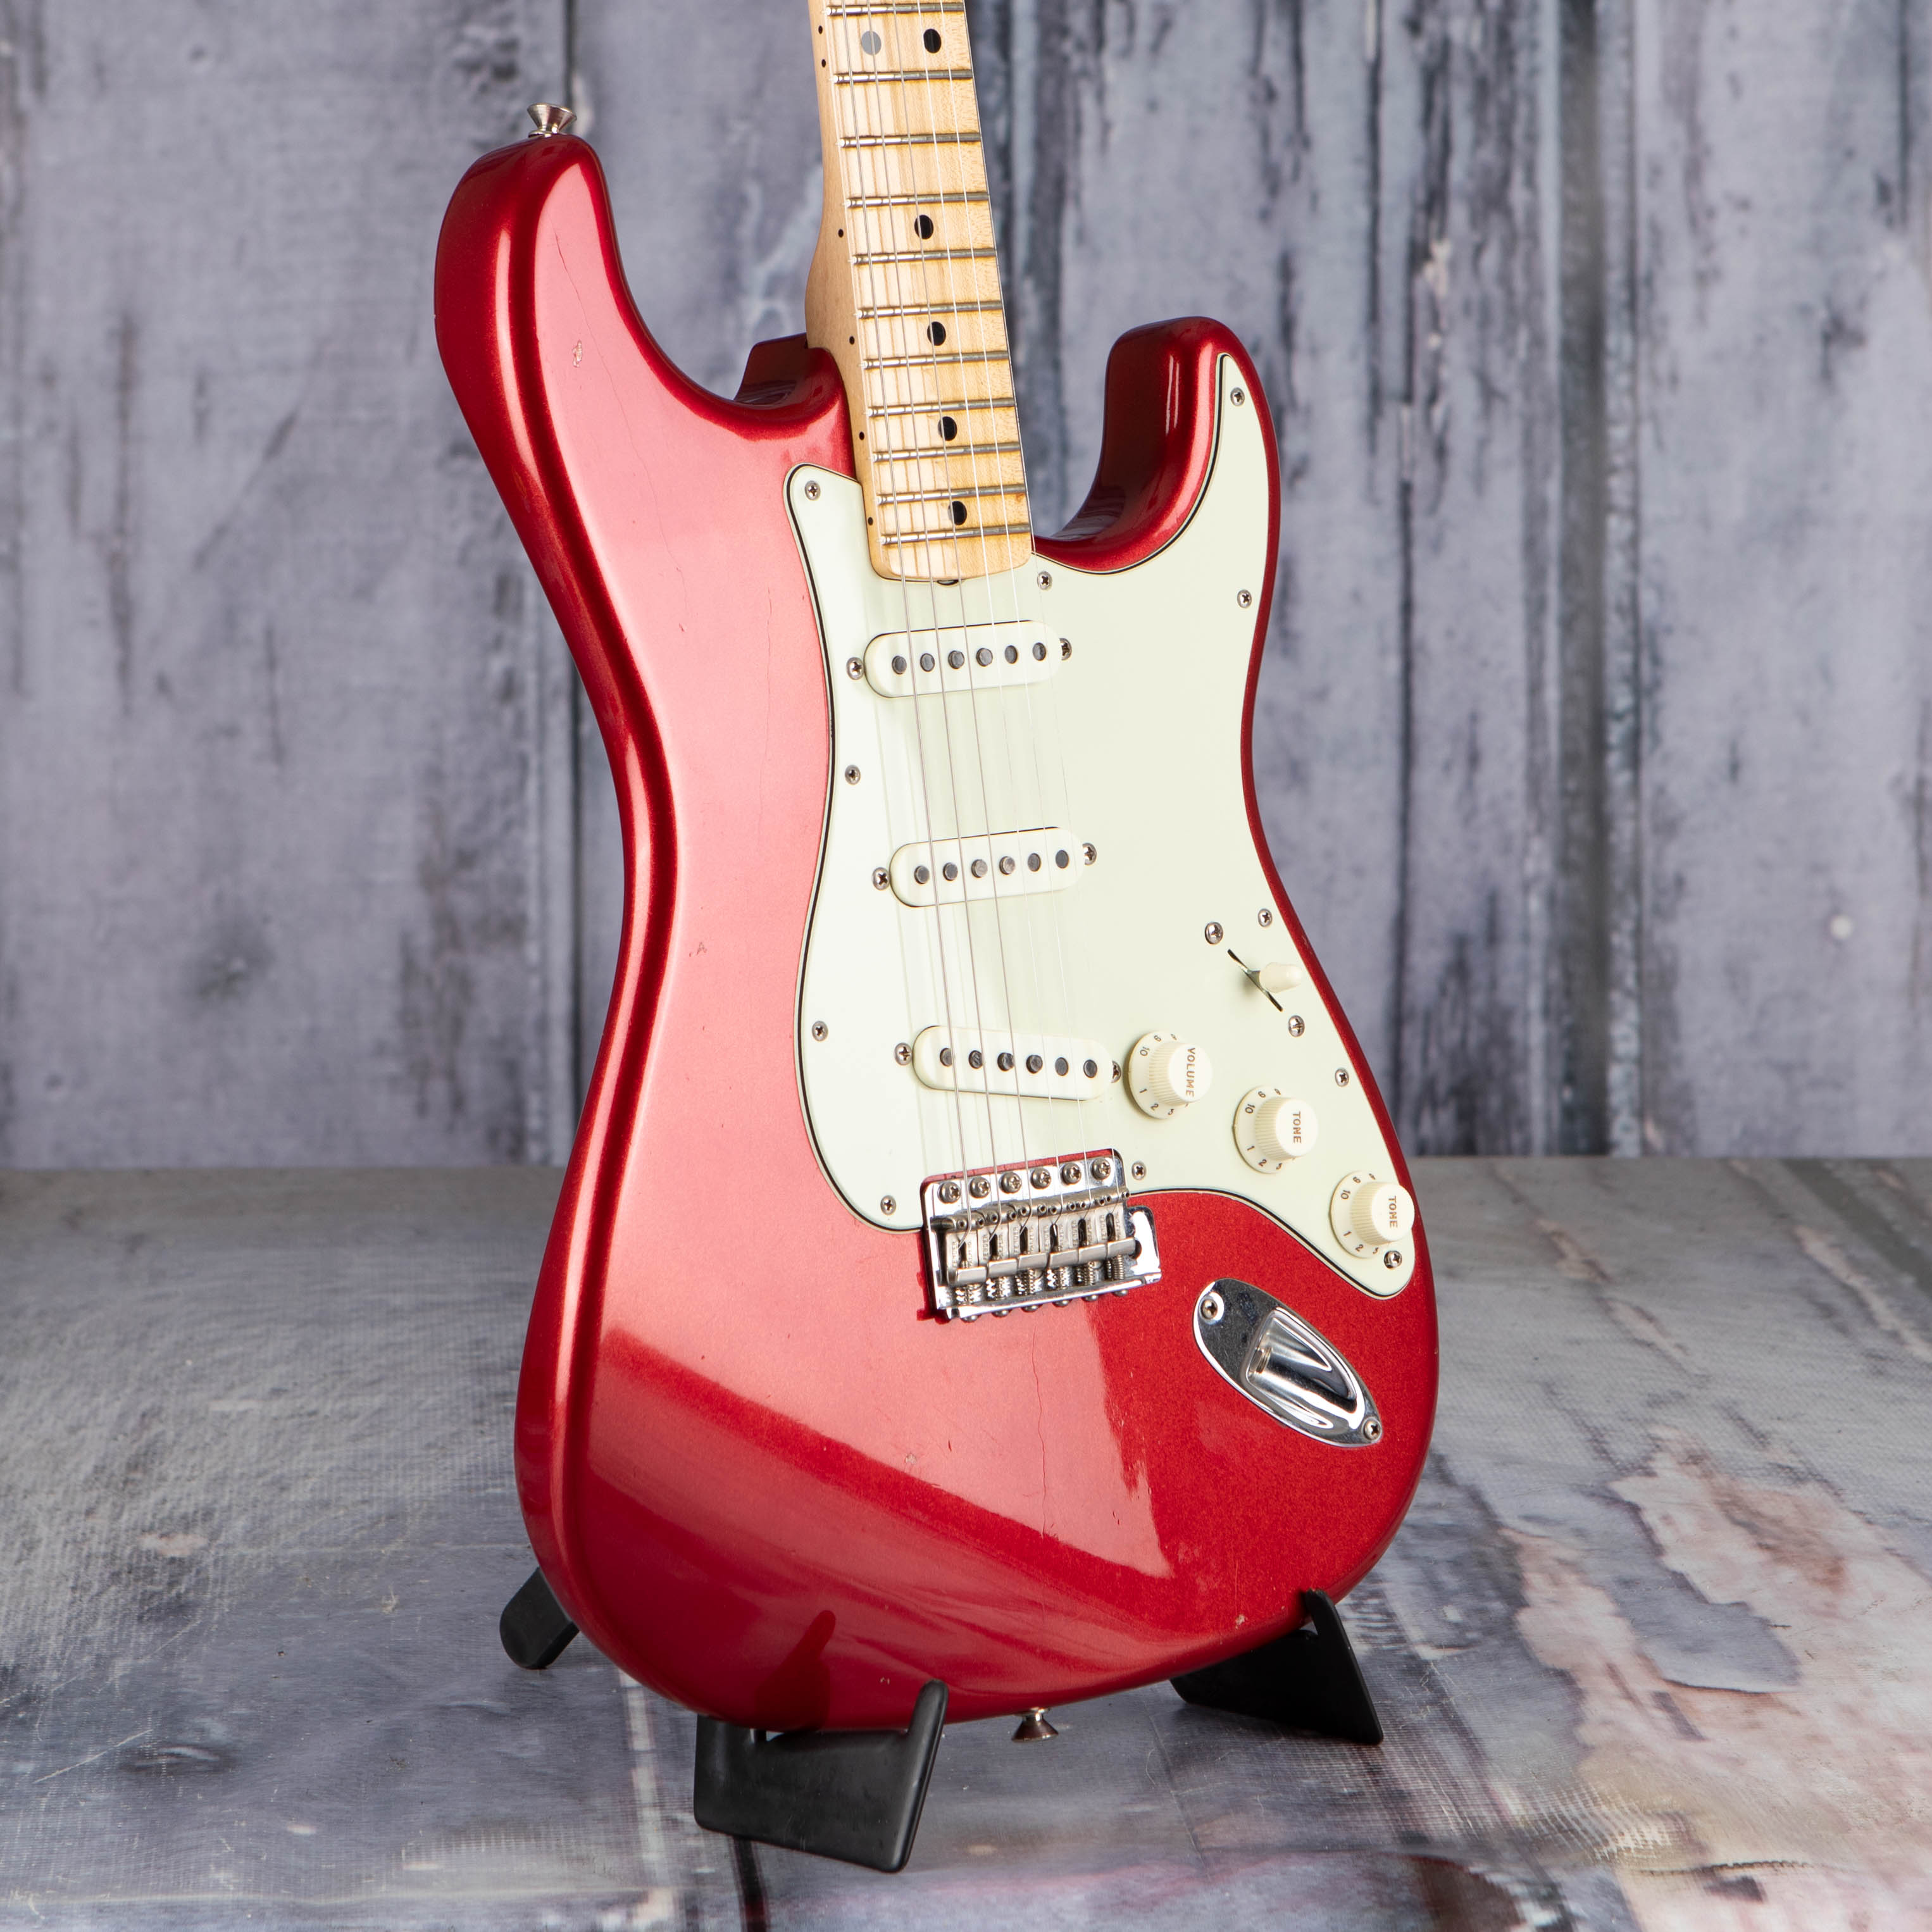 Used Fender Custom Shop 70 Stratocaster Journeyman Relic Closet Classic Electric Guitar, Aged Firemist Red, angle